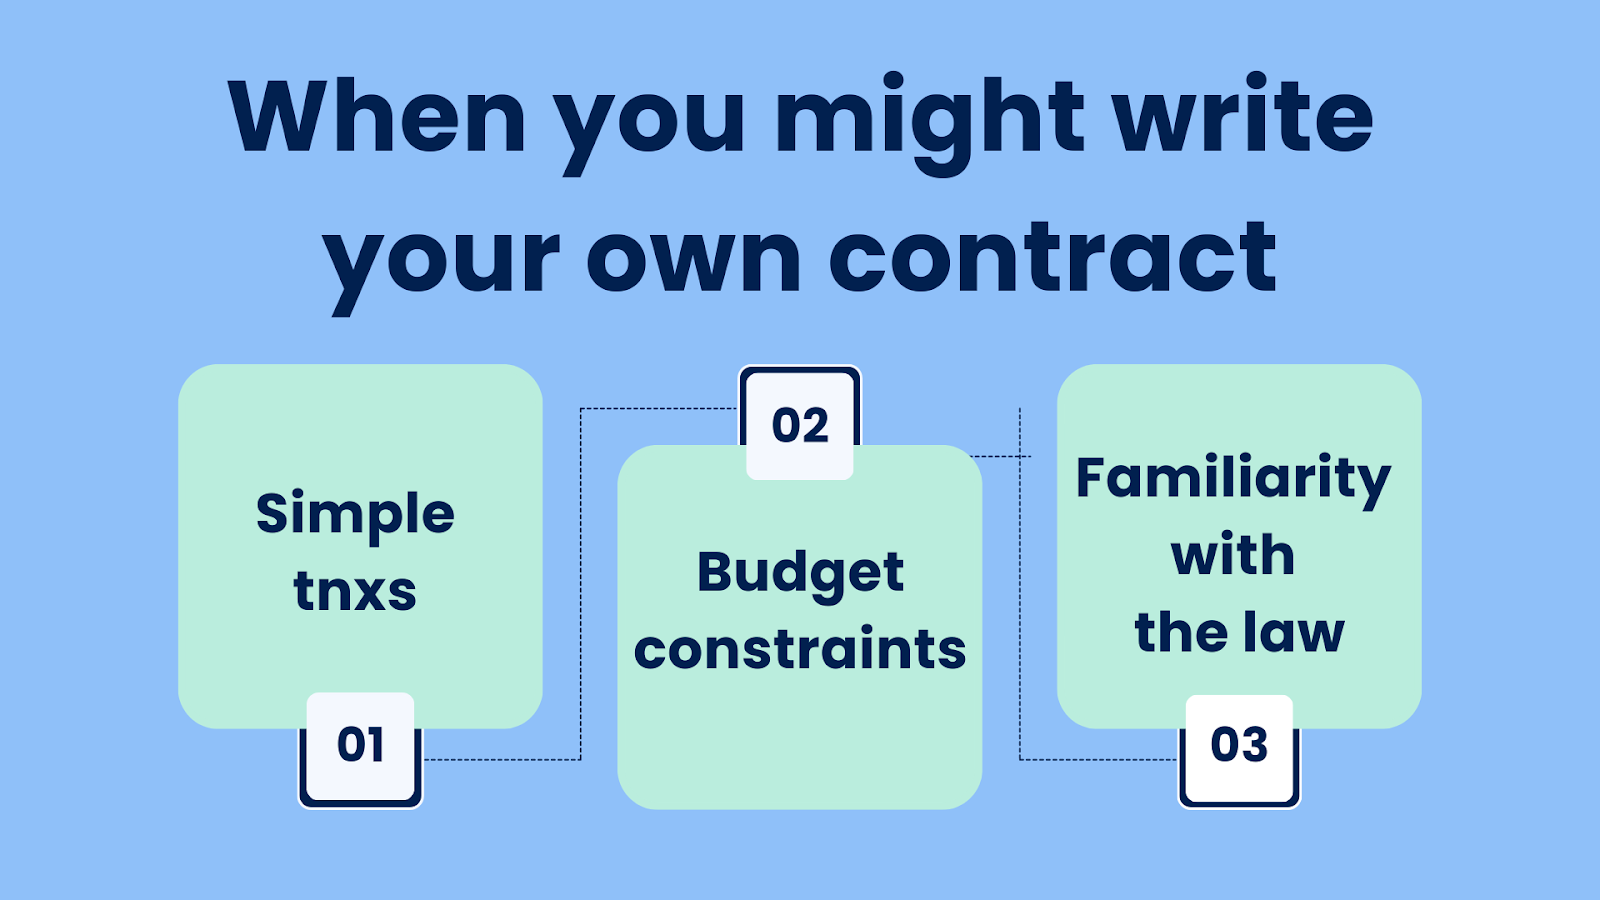 When I need to write my own contract